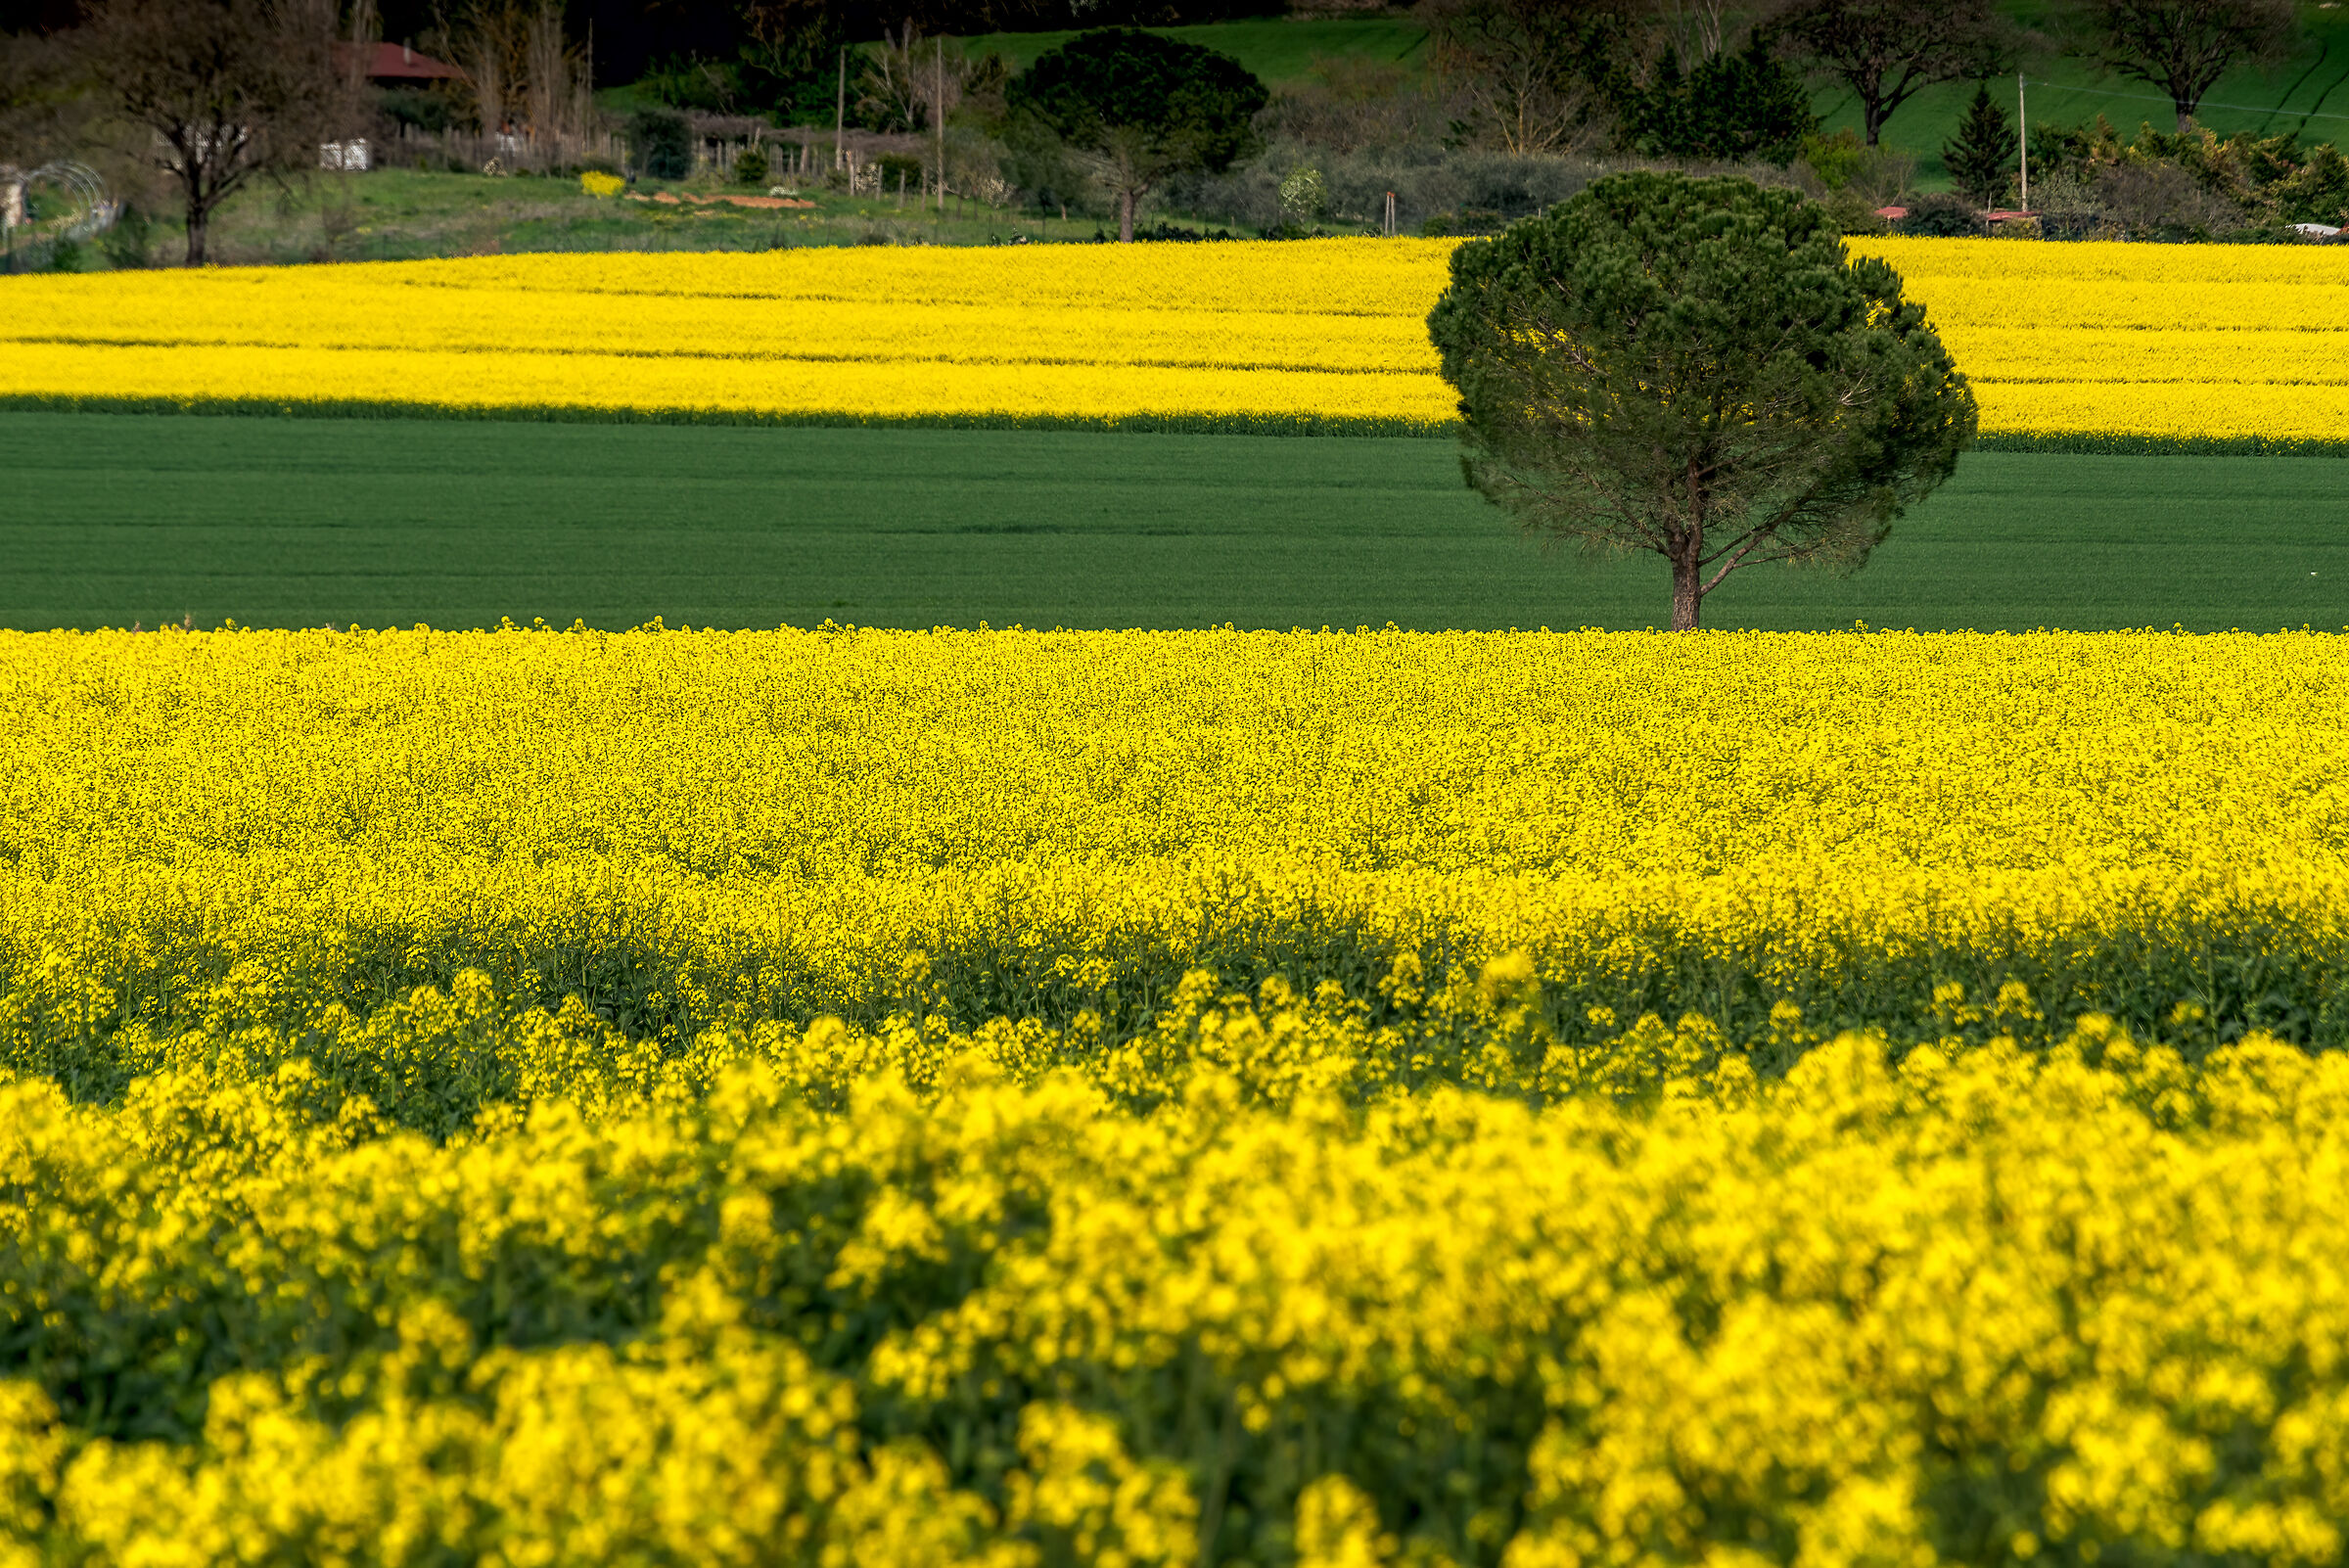 yellow and green in umbria...